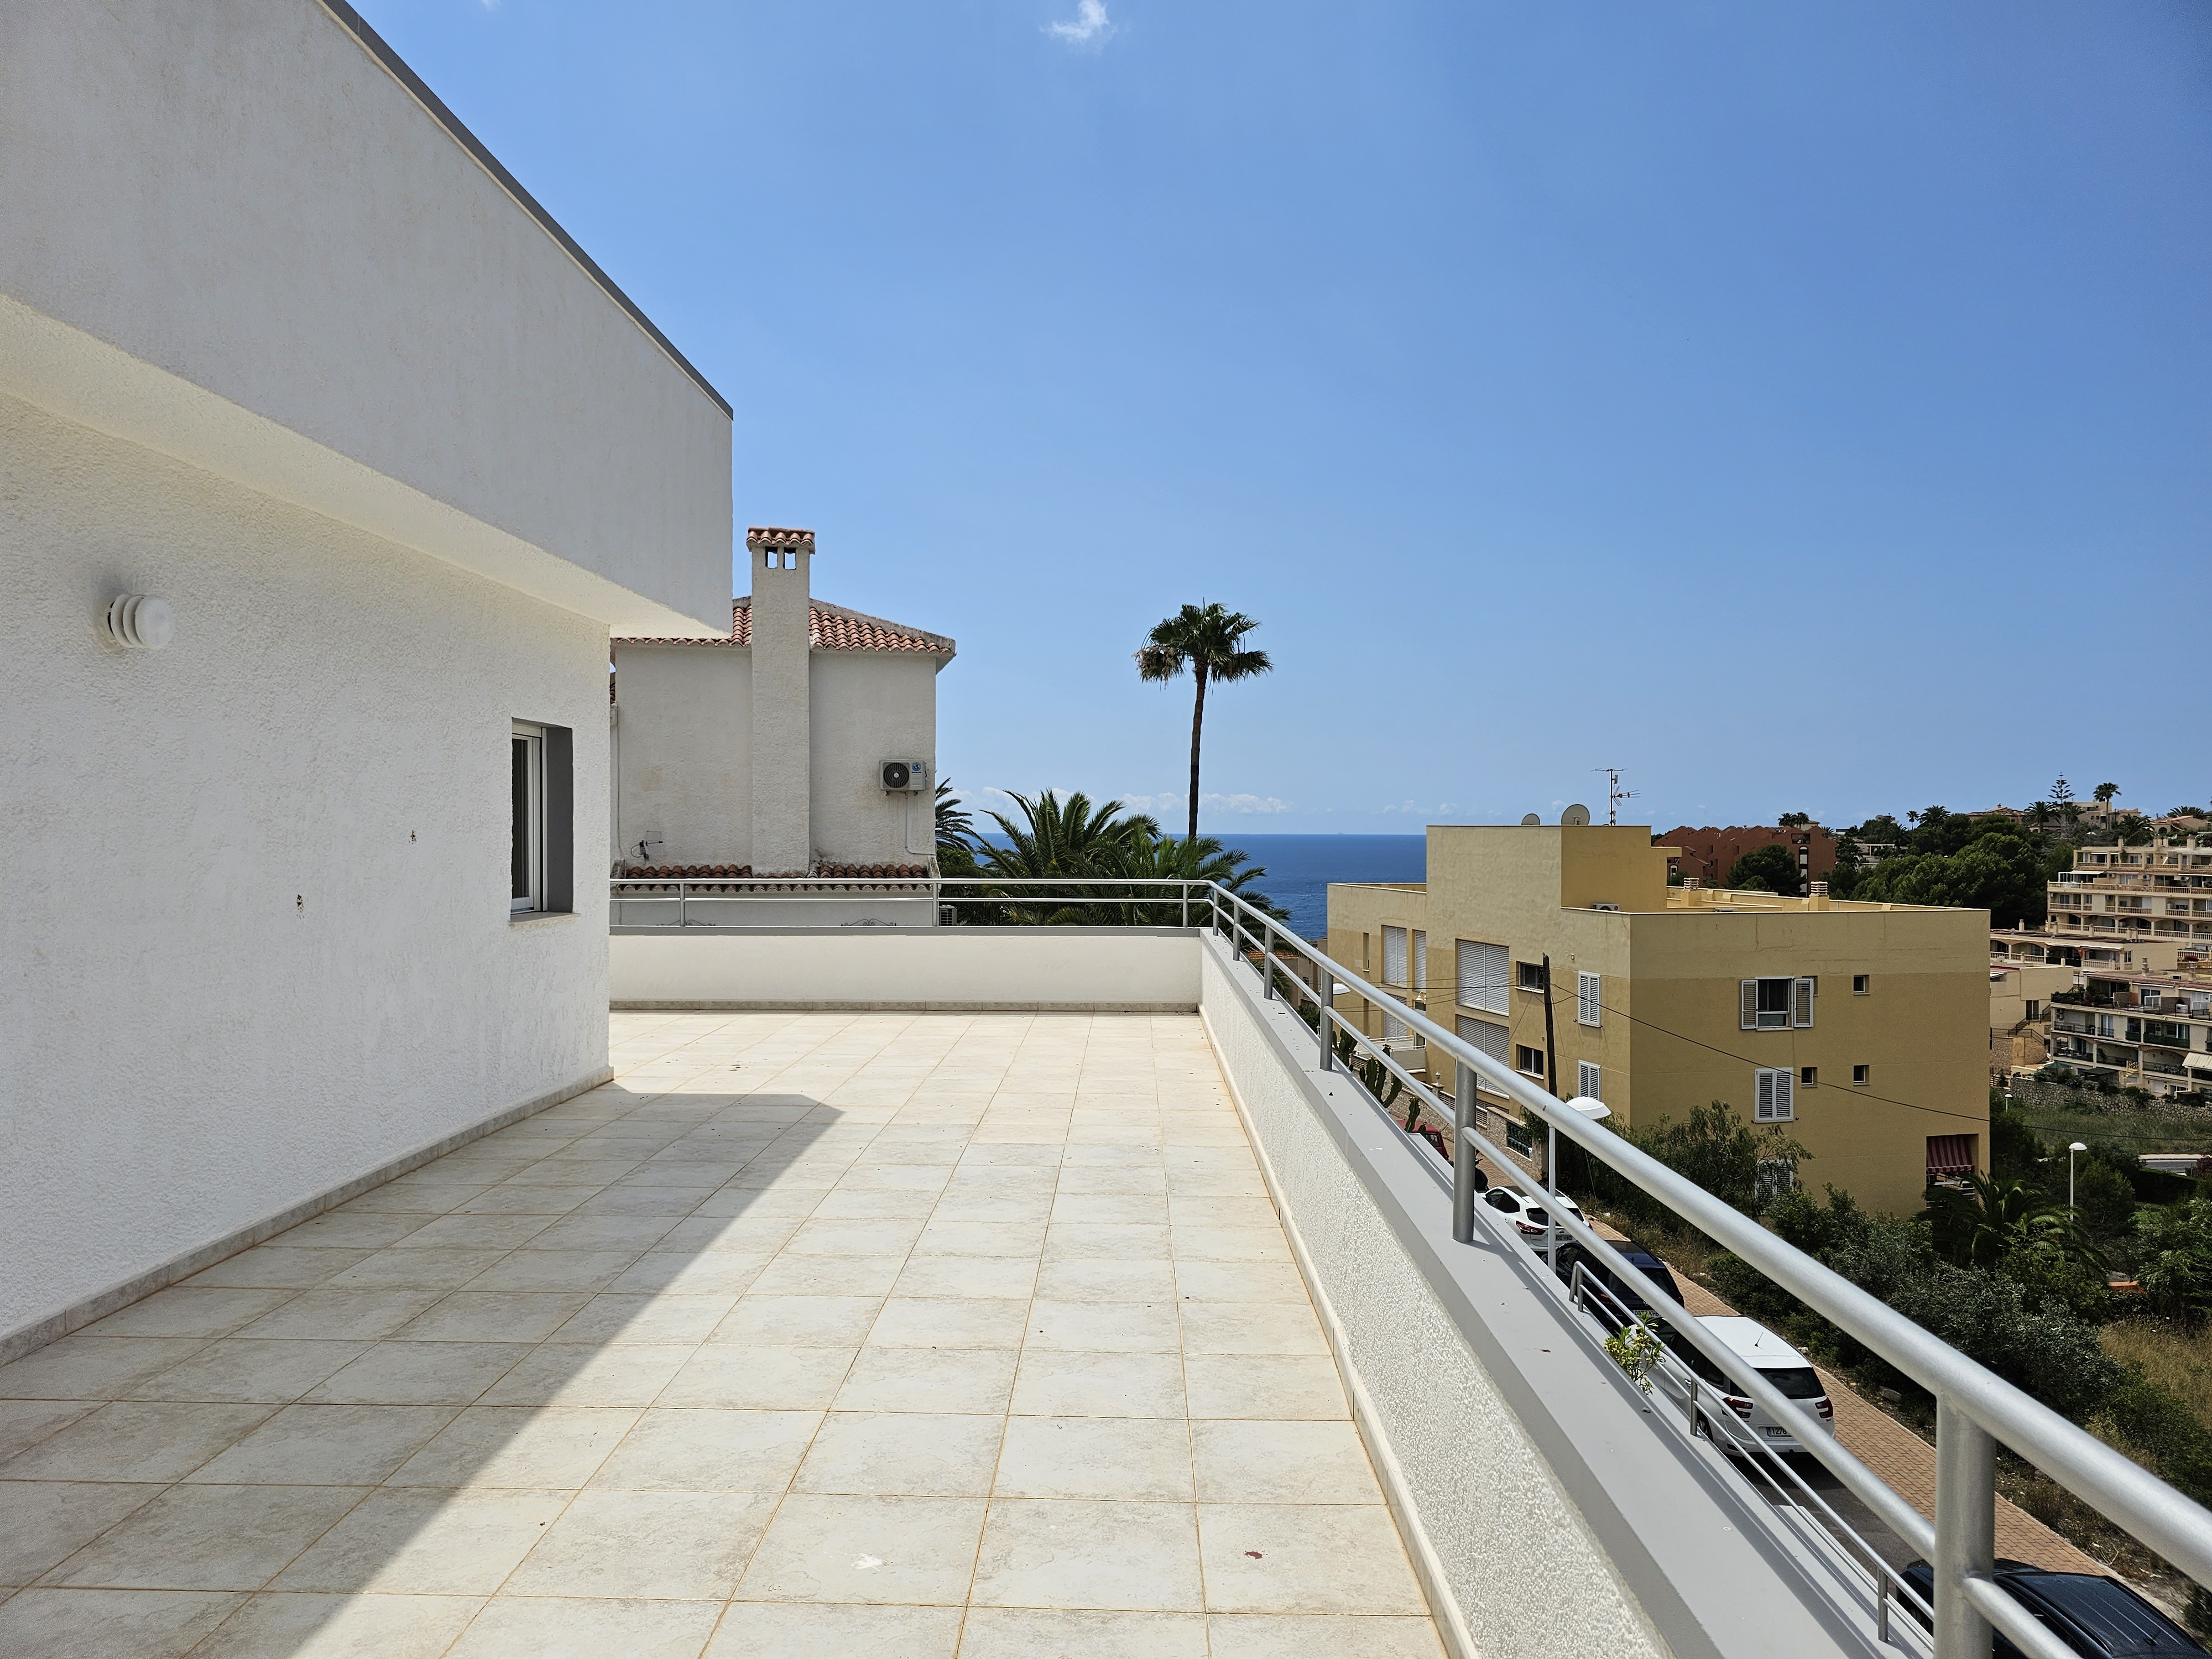 VILLA WITH LARGE INTERIOR SPACES WELL LOCATED A FEW STEPS FROM THE SEA AND THE URBAN CENTER.